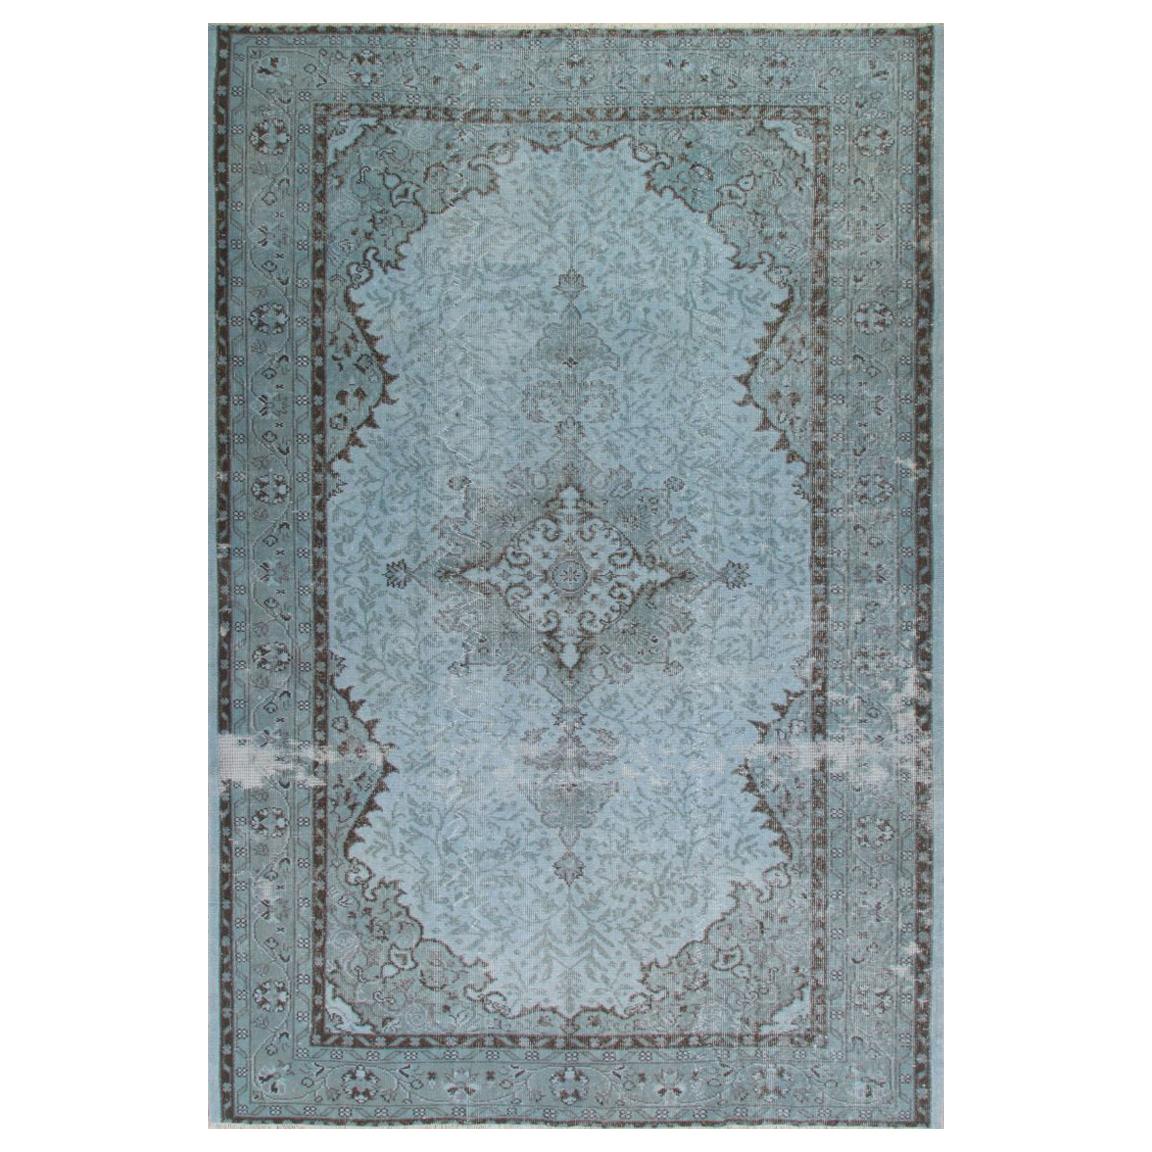 5.7x9.3 Ft Hand-Knotted Vintage and Modern Area Rug Overdyed in Light Blue Color For Sale